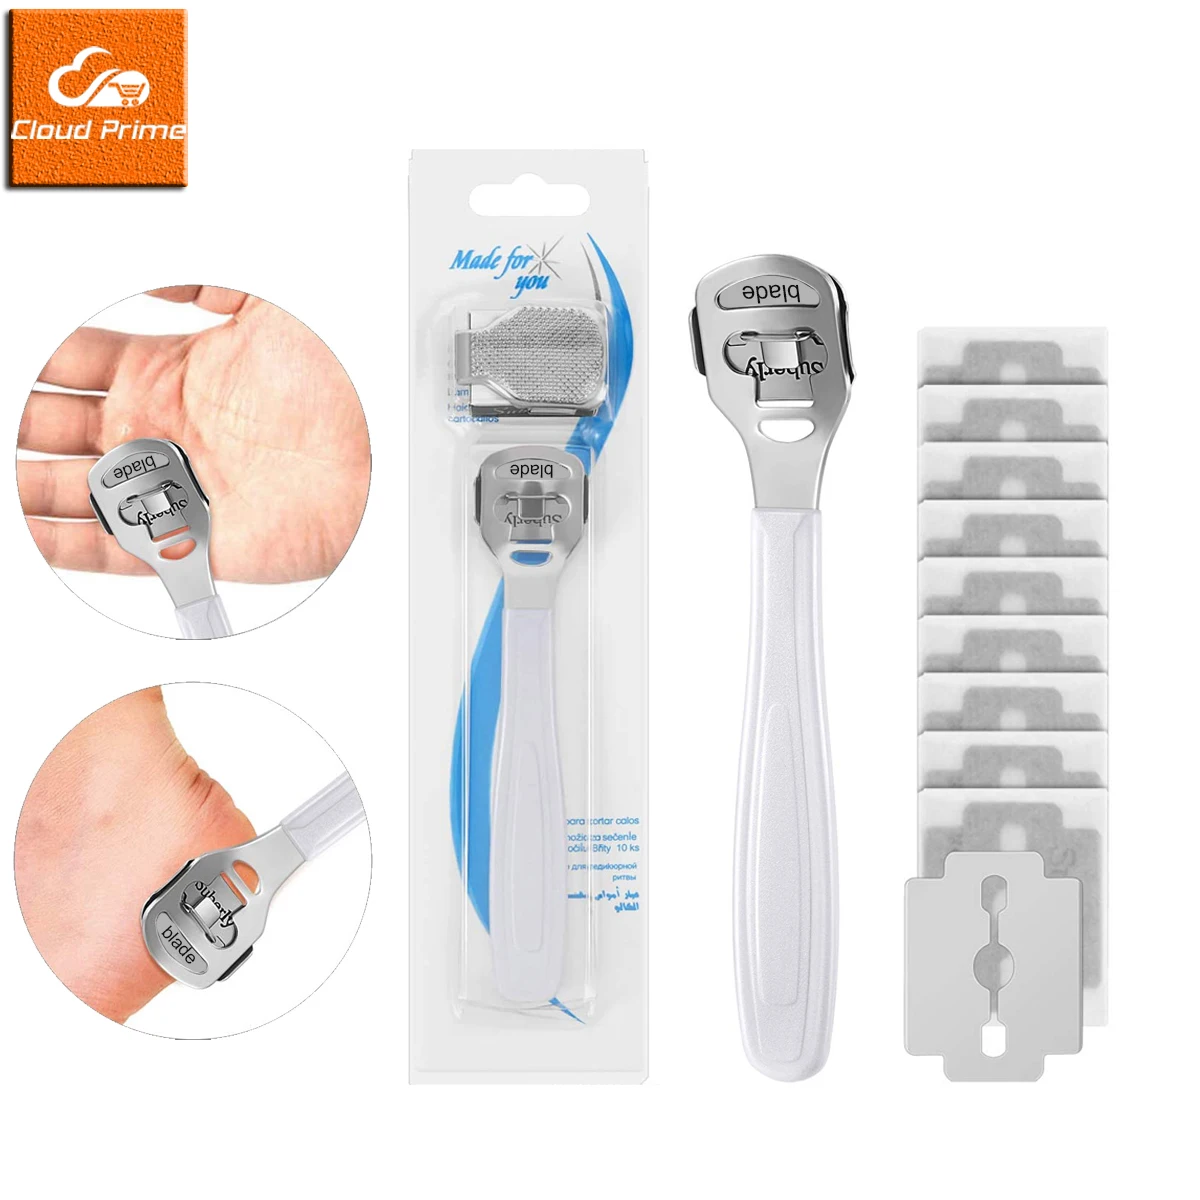 Foot Callus Shaver Heel Hard Skin Remover Hand Feet Pedicure Razor Tool Shavers Stainless Steel Handle 10 Blades Foot Care Tools